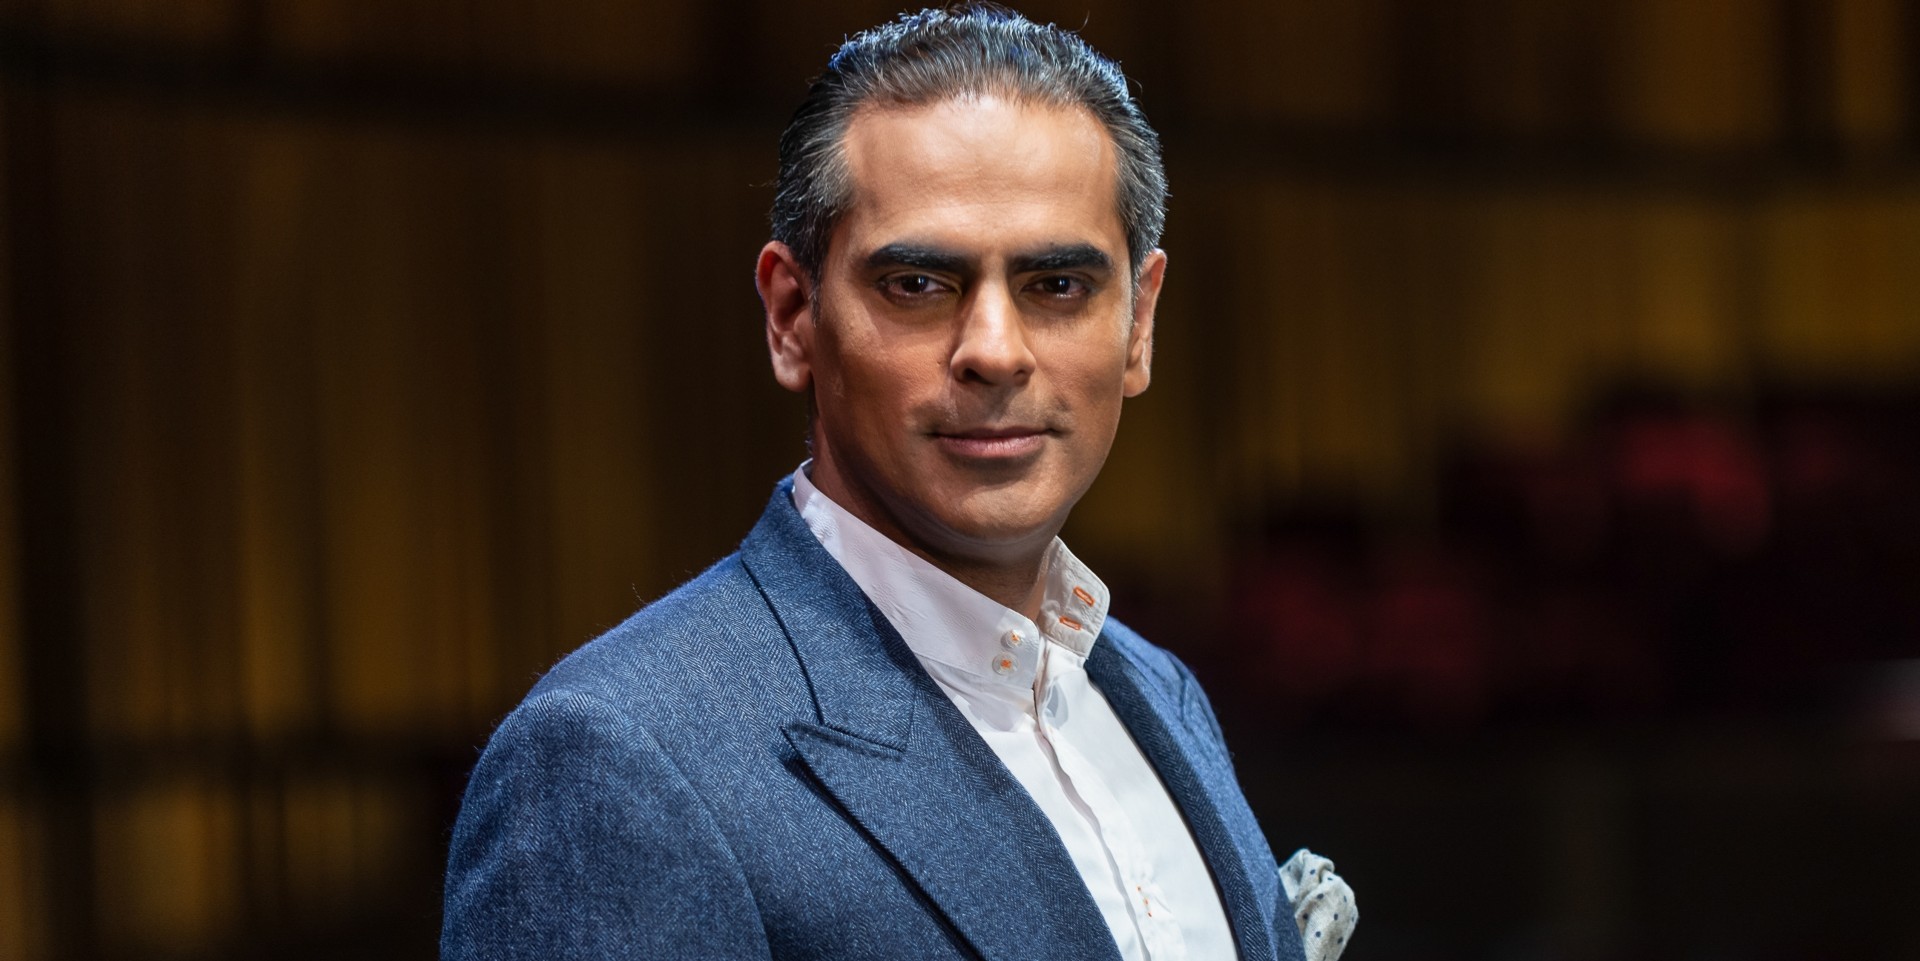 "We're on this journey that is evolving at a fantastic pace": An interview with SIFA 2019 Festival Director Gaurav Kripalani